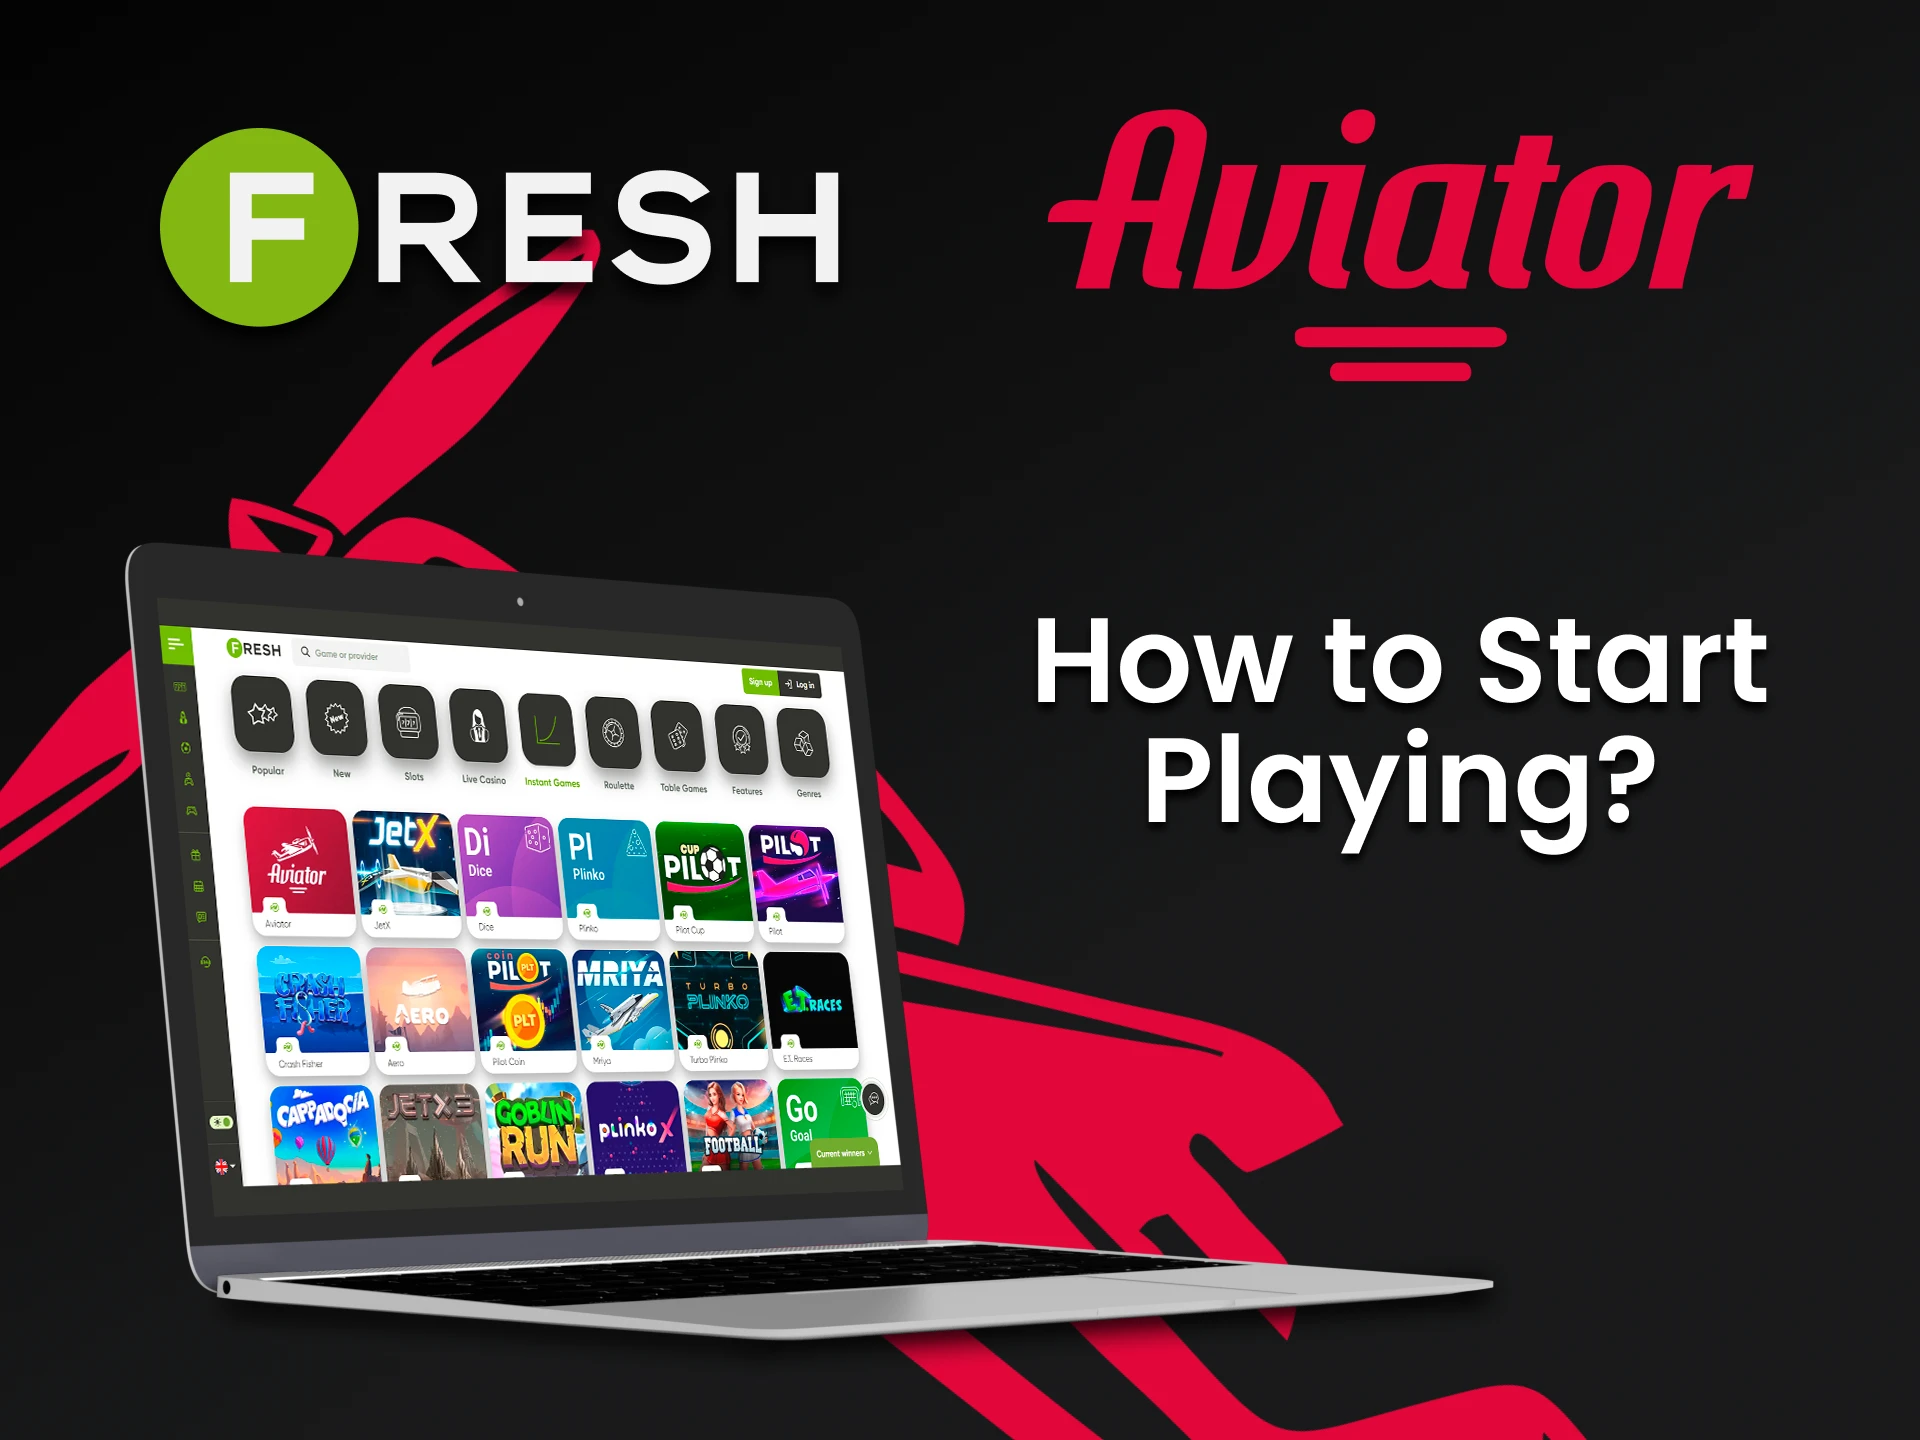 You can find the Aviator in the casino section of Fresh Casino.